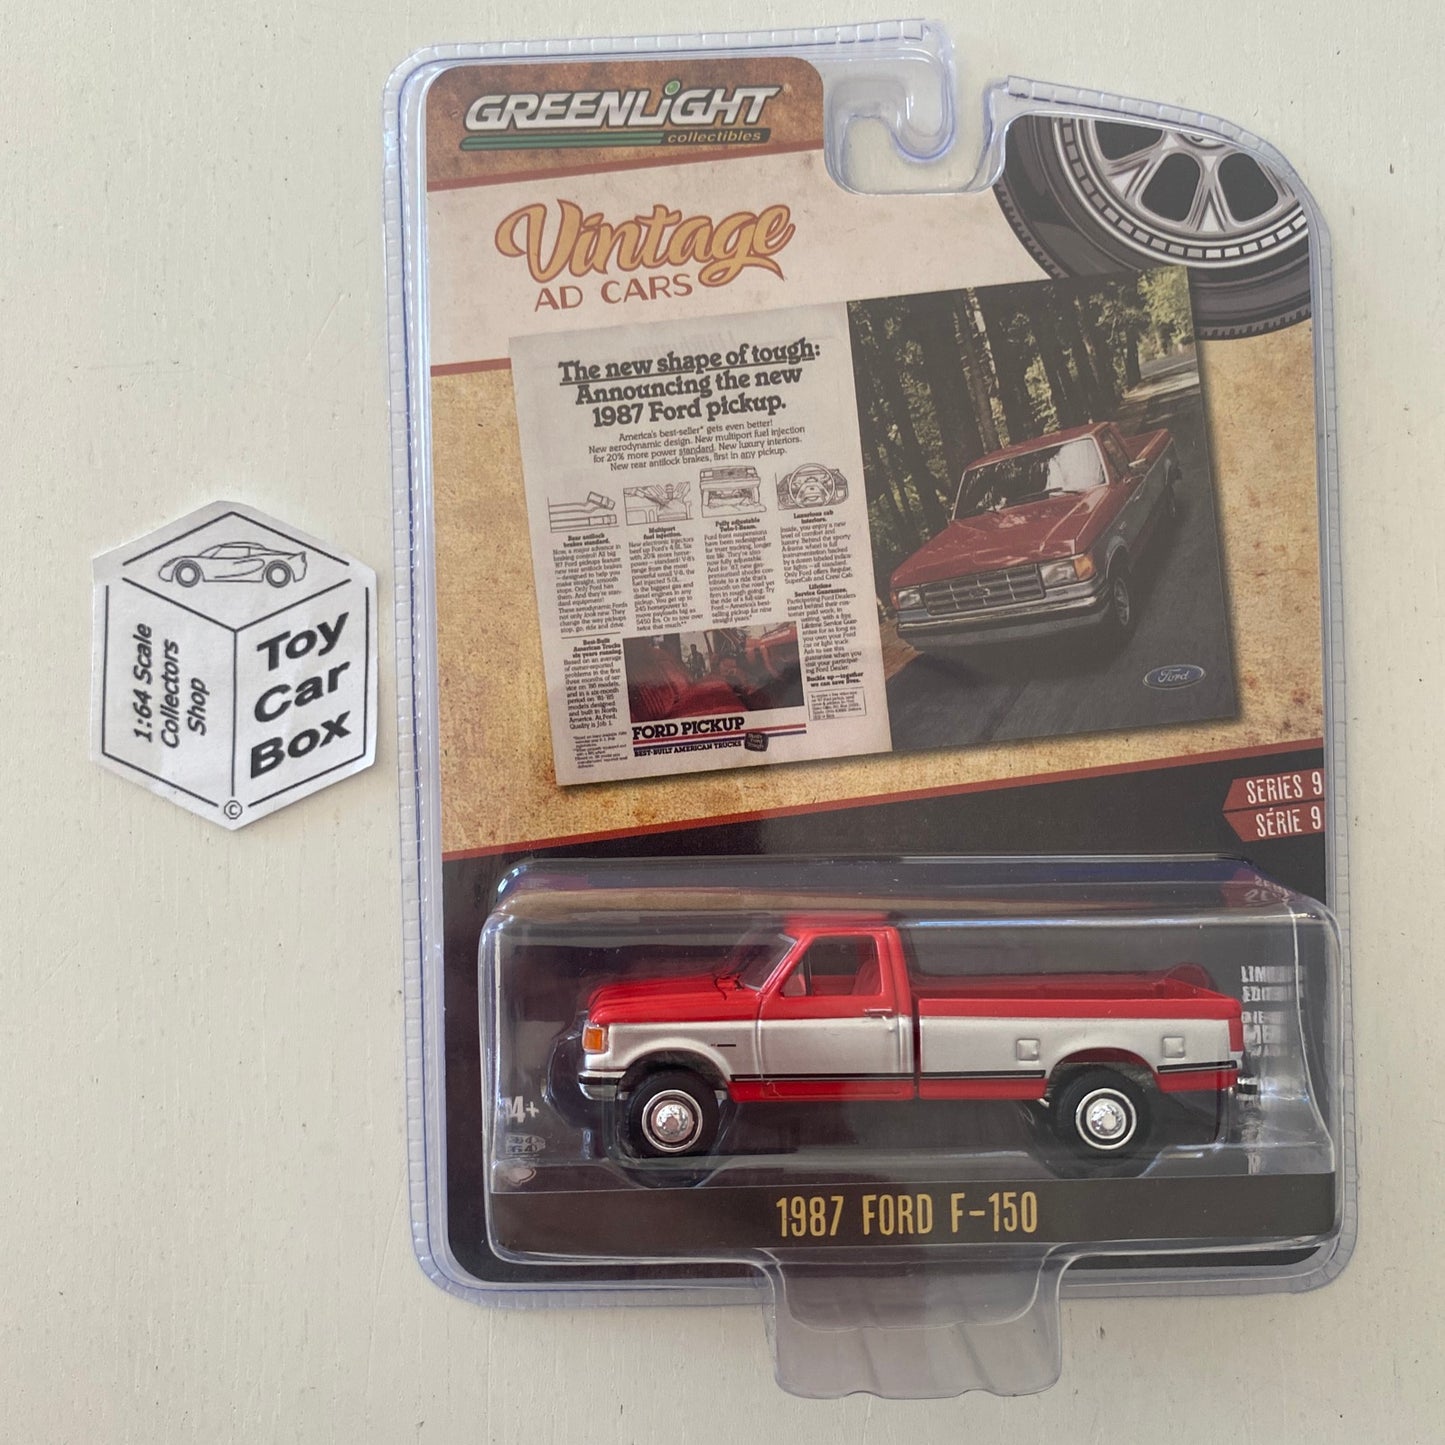 GREENLIGHT - 1987 Ford F-150 Pickup (Red -Vintage Ad Cars Series 9) J13g